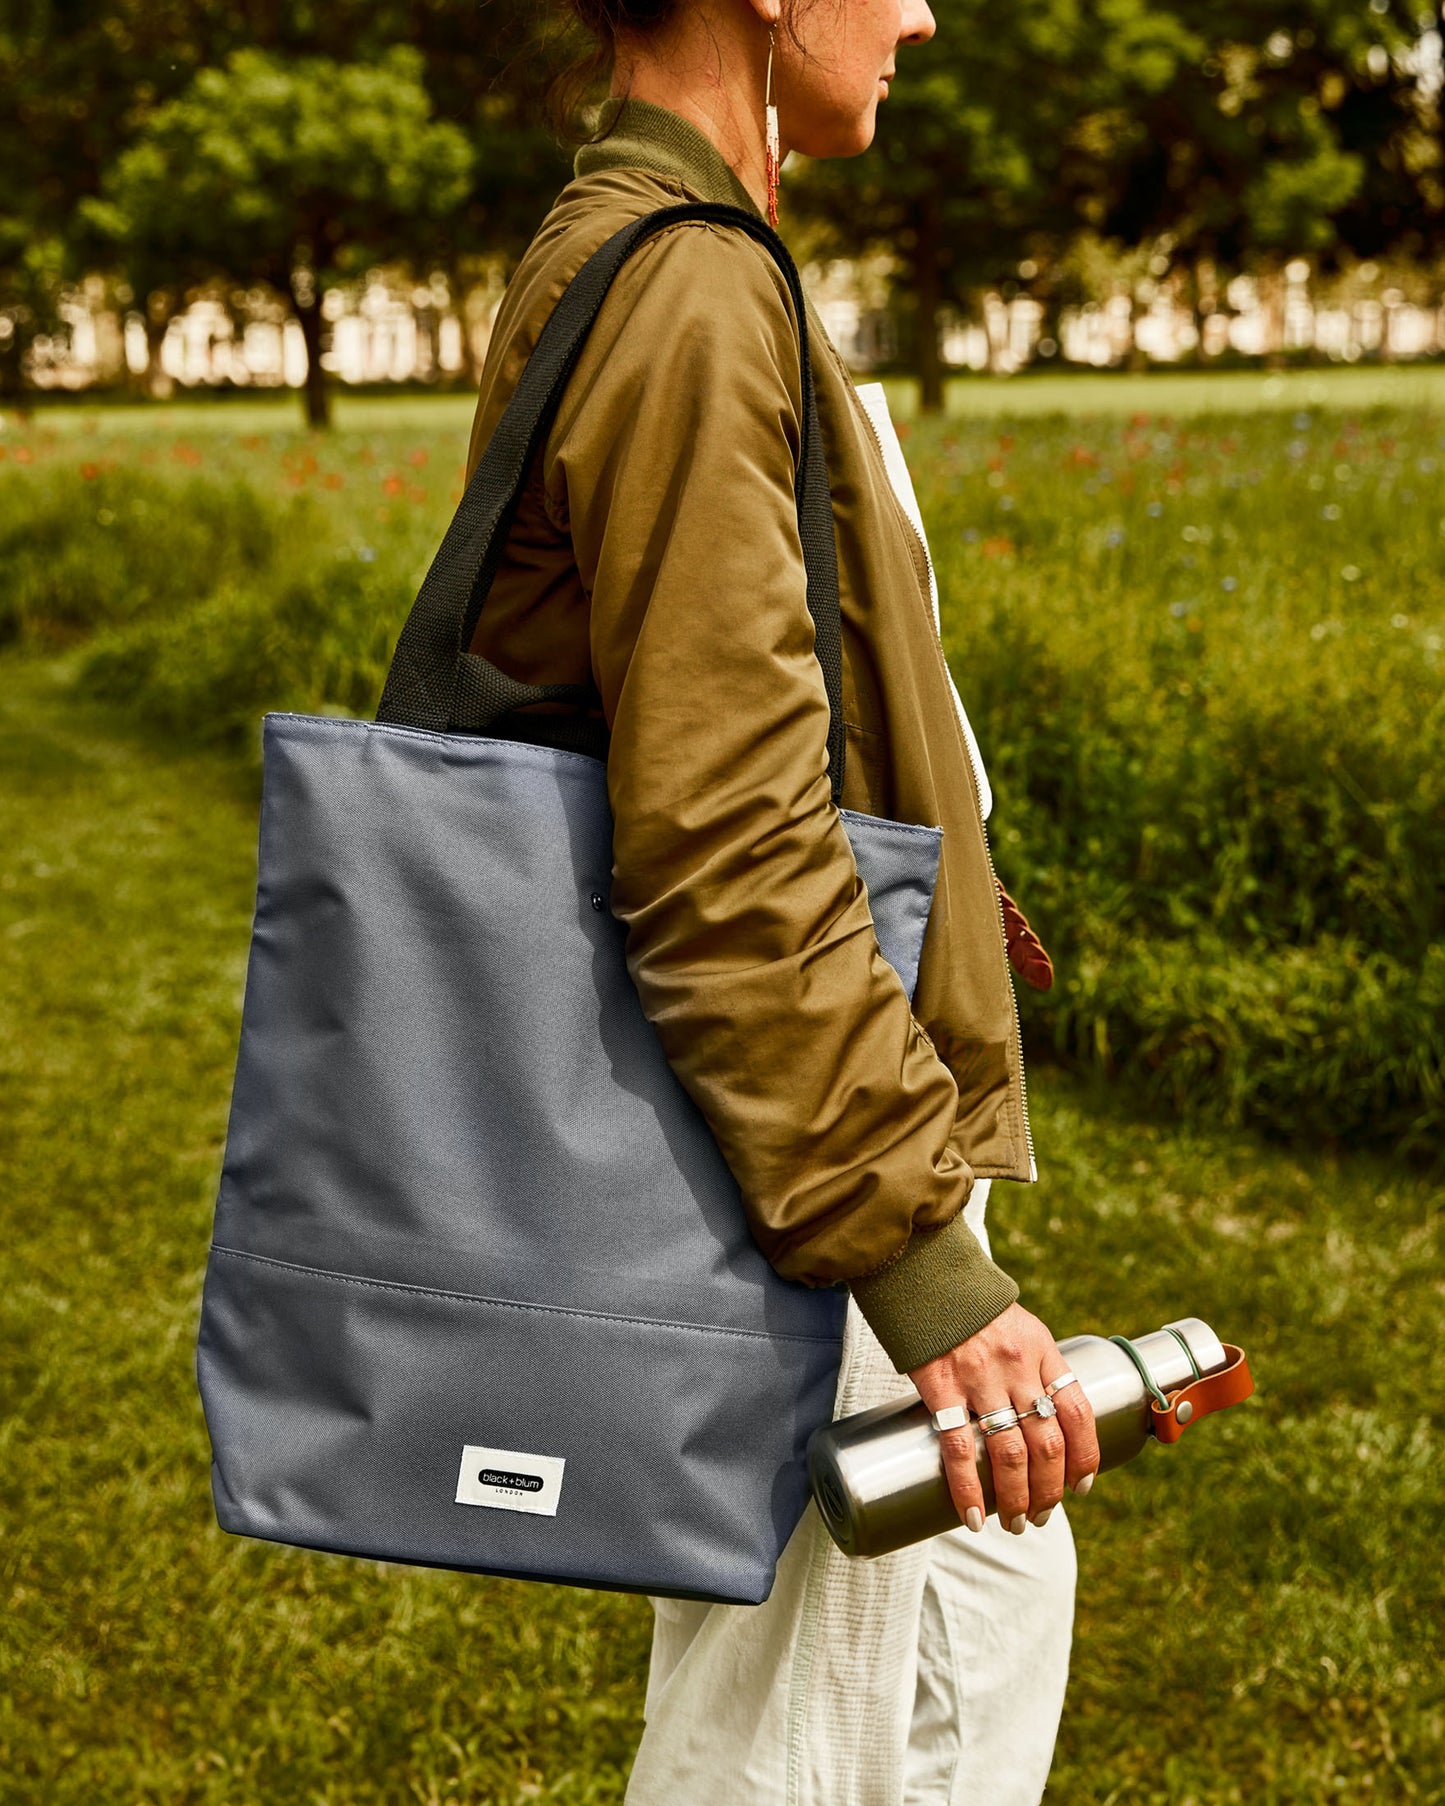 Black+Blum | Lunch Bag | Food Safe, Water Repellent, 100% Leak Proof,  Recycled Plastic, BPA Free, Insulated, Reusable, Sustainable, Eco Friendly